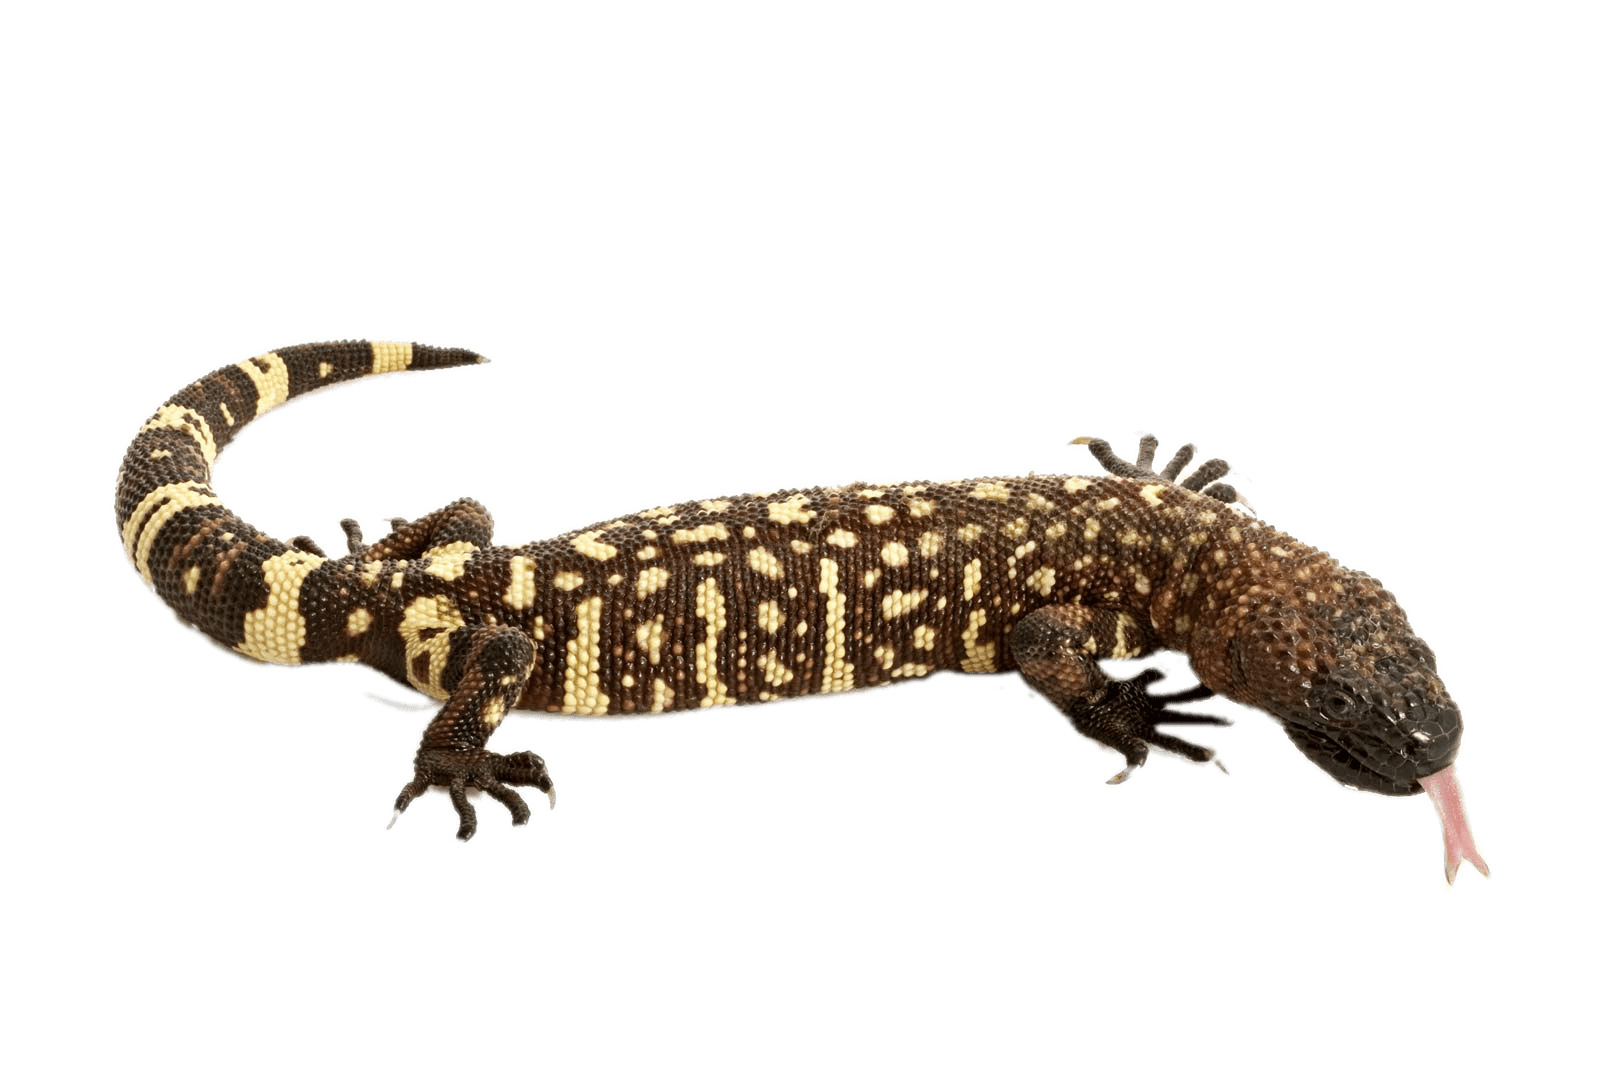 Mexican Beaded Lizard png icons